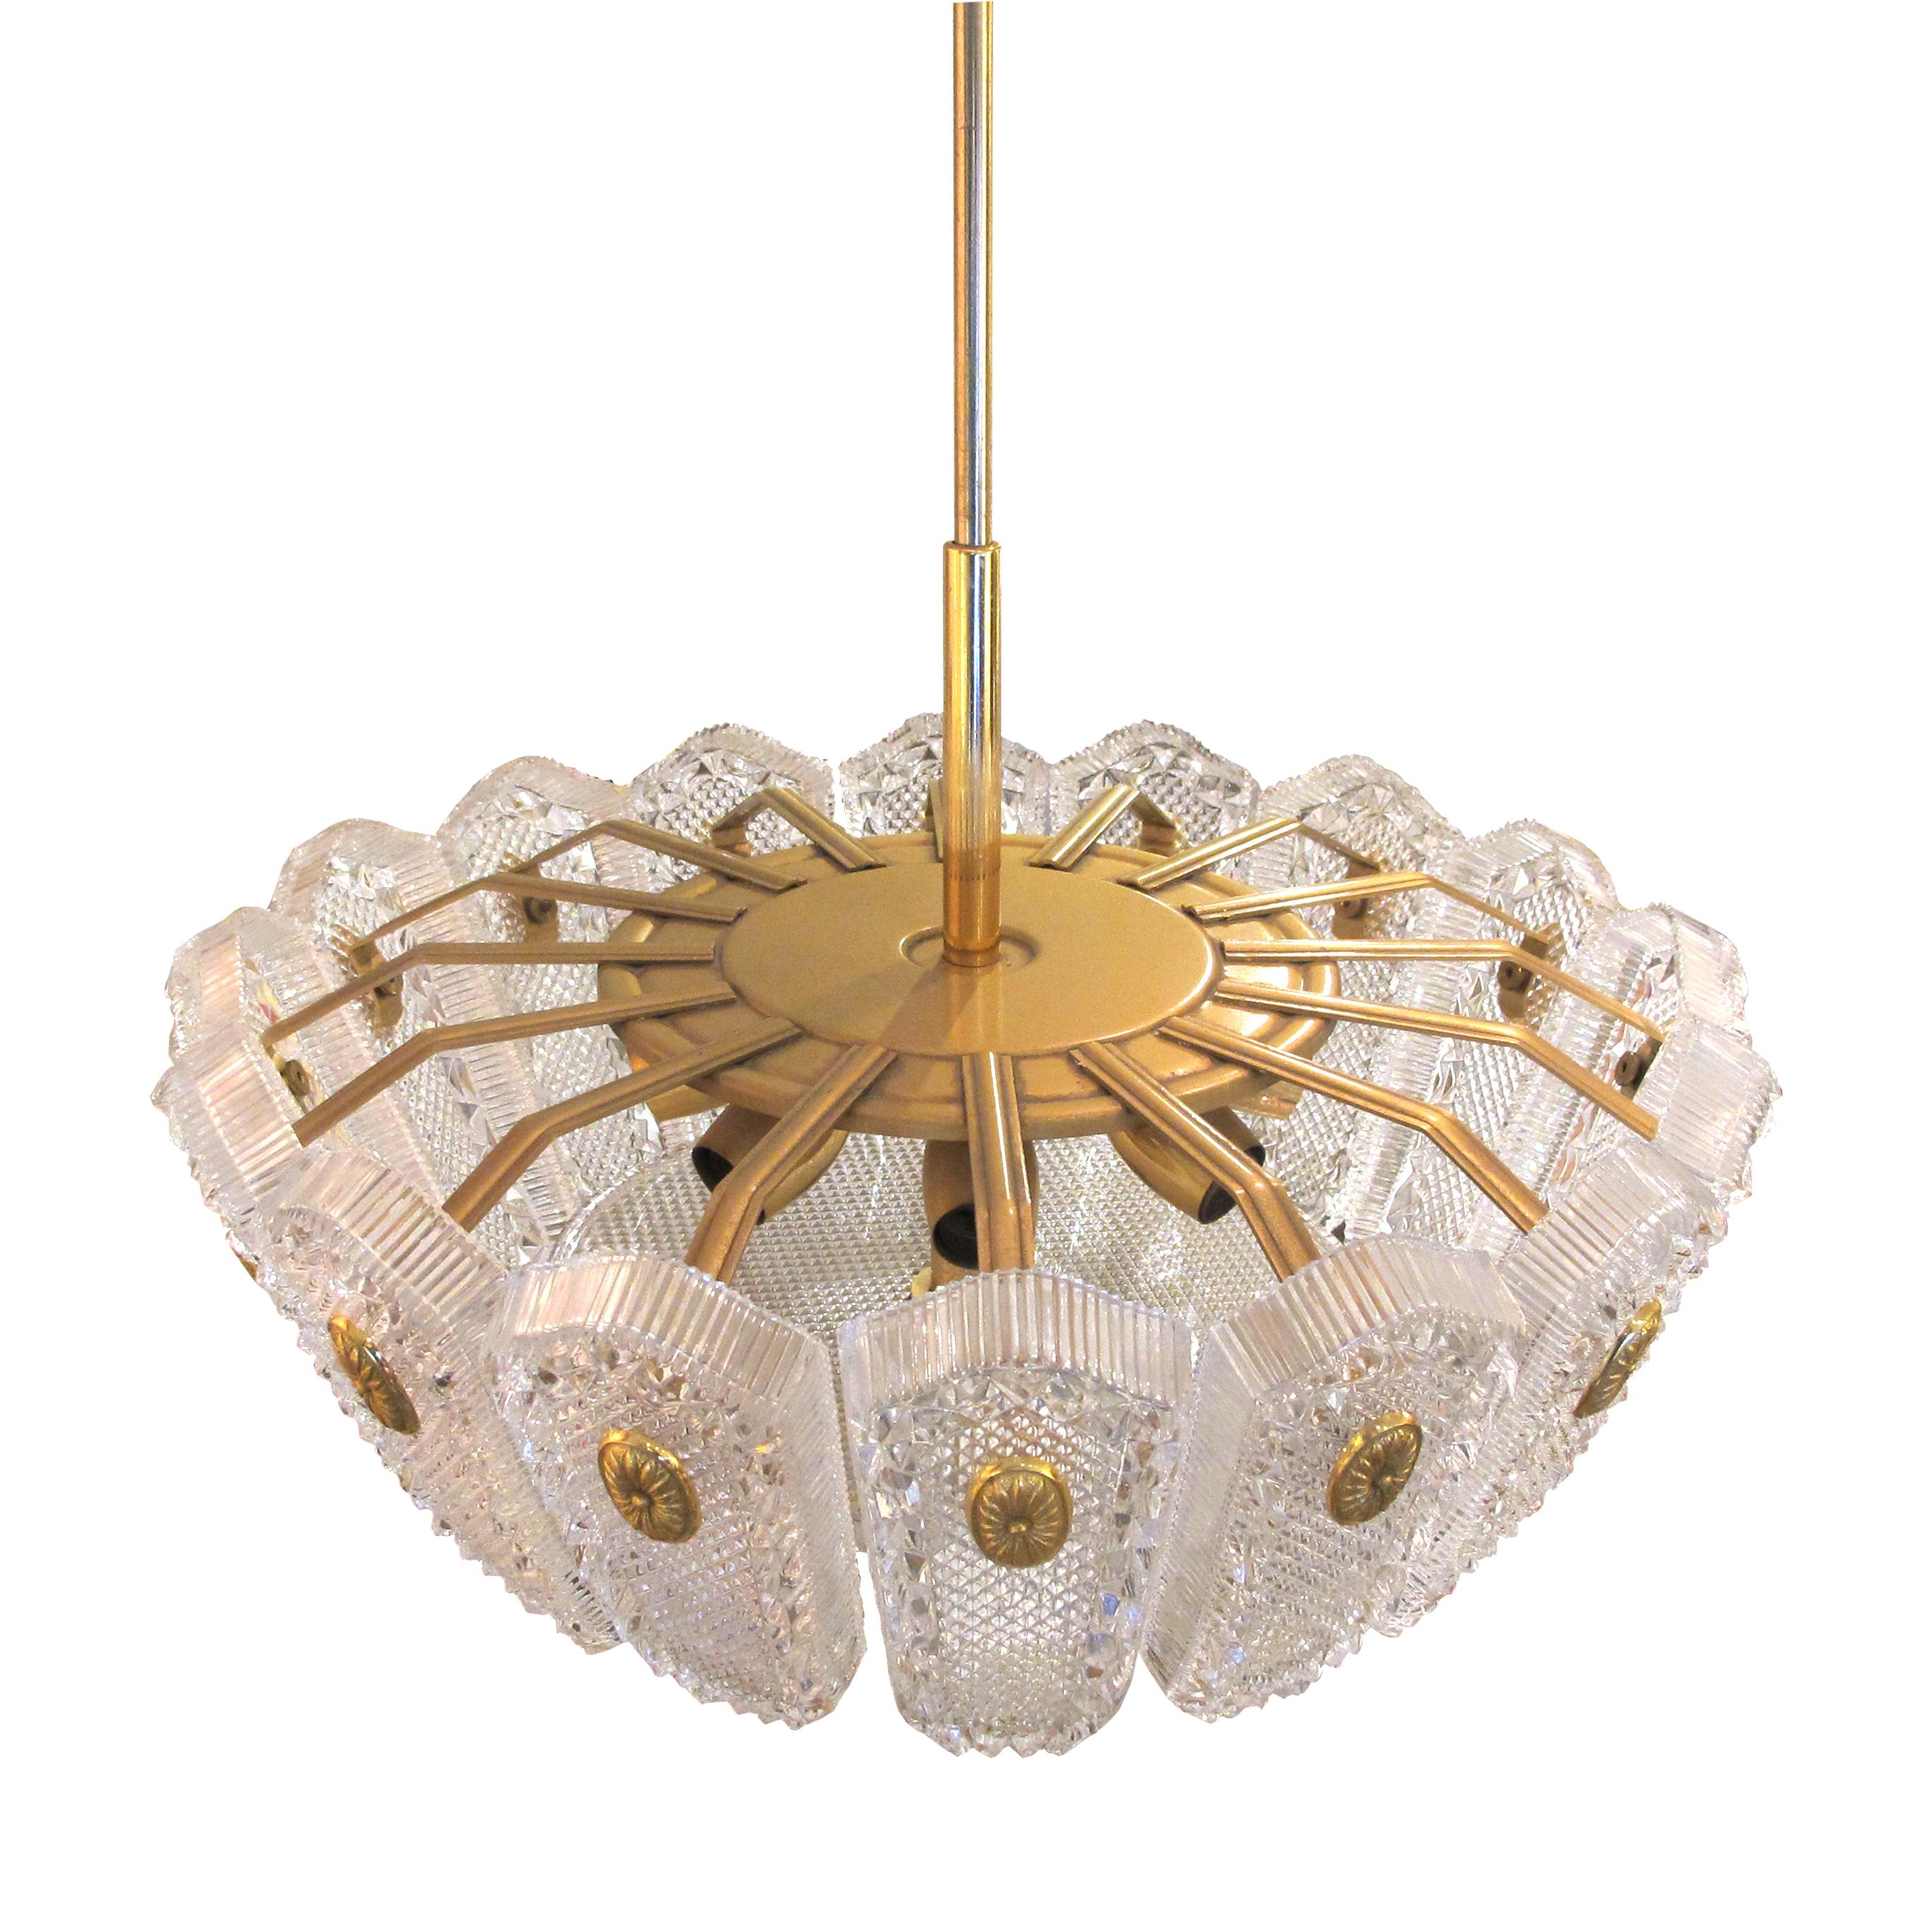 The ceiling light is a large light made with a series of 16 beautifully decorated glass panes held onto the frame by brass medallions. The chandelier is a great example of Orrefors's work in the 1960s/70s. During this period, the company was known